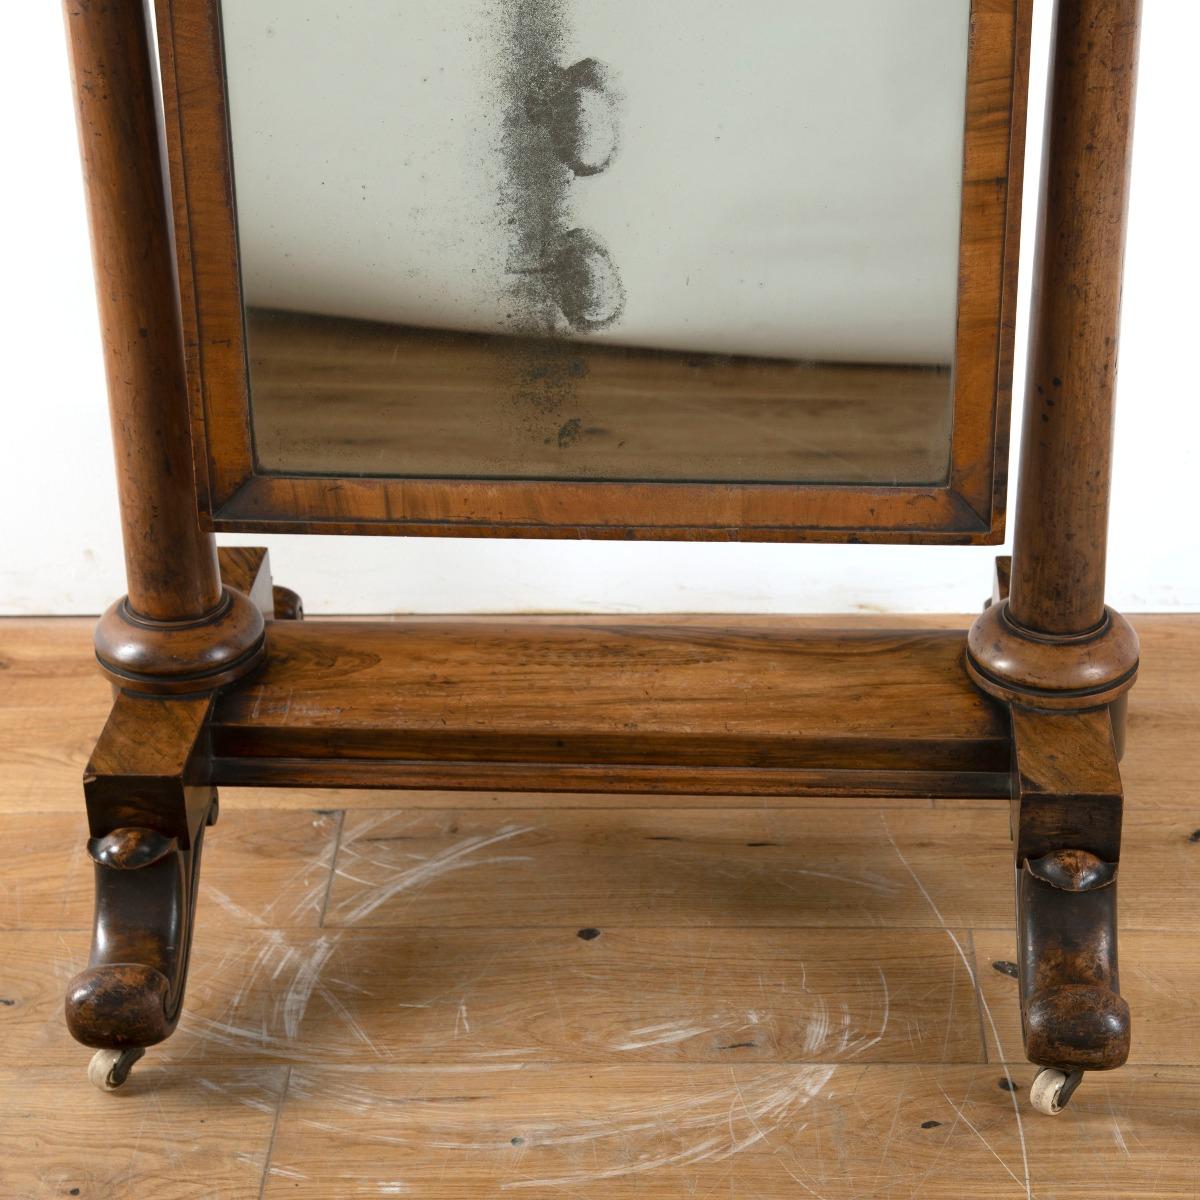 William IV mahogany cheval mirror with stunning foxed mirror plate.